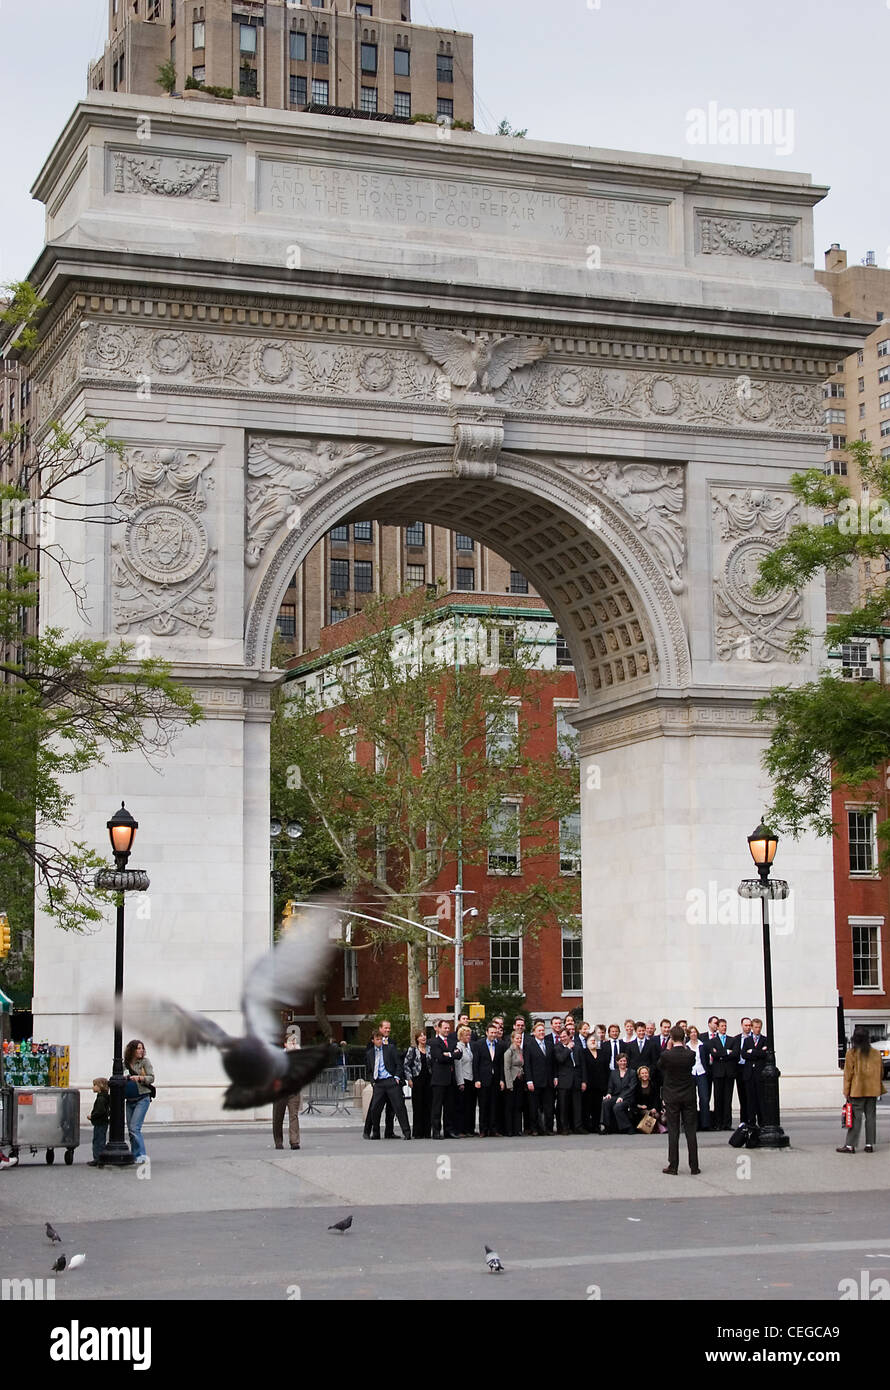 A group photo under the Washington Square Arch, New York City Stock Photo